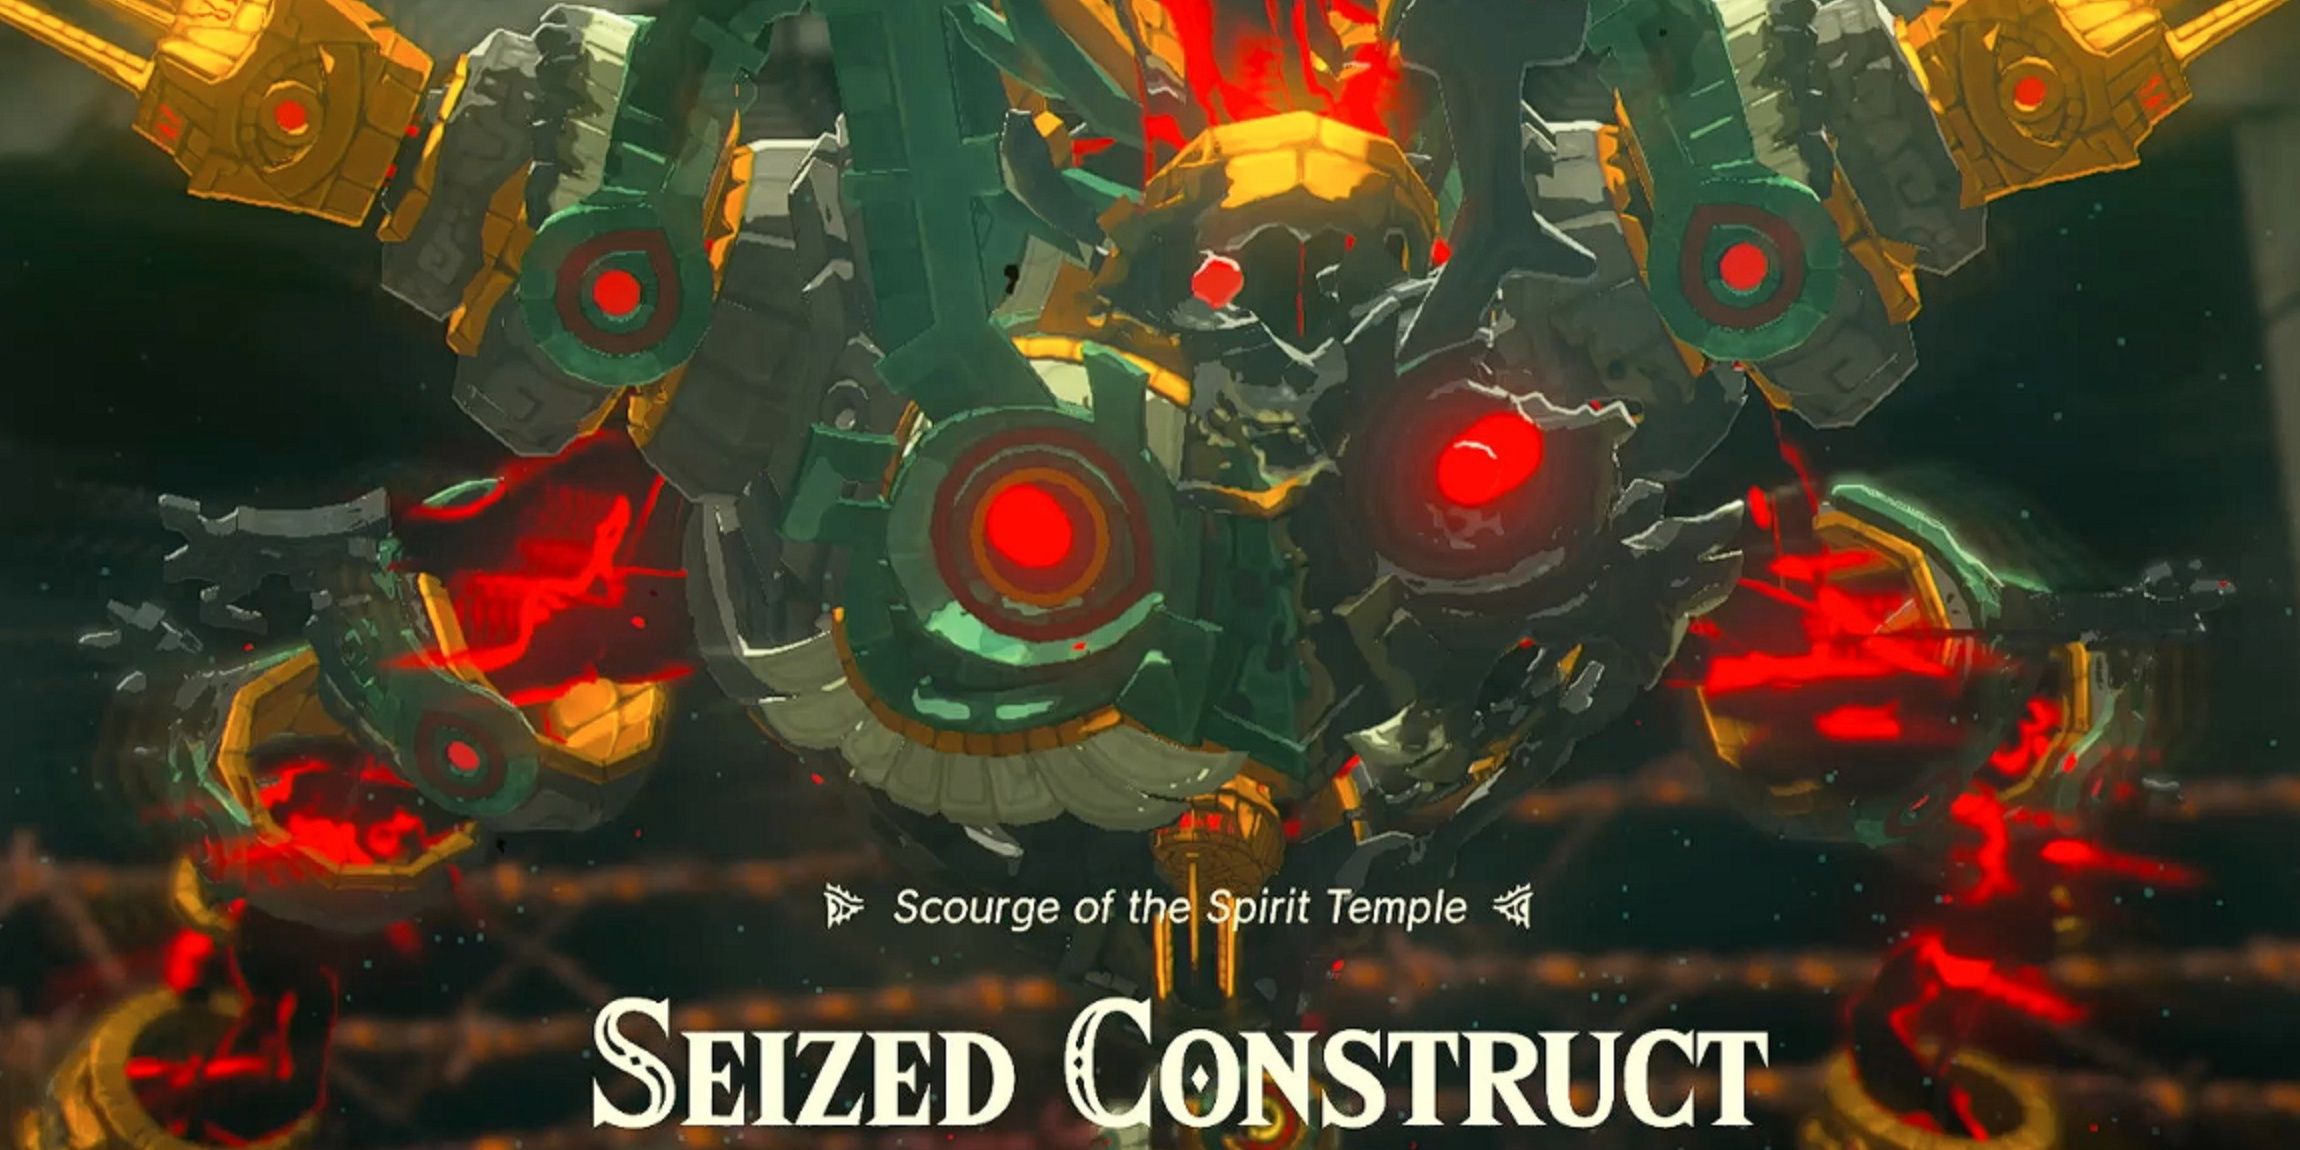 The Seized Construct roars in The Legend of Zelda: Tears of the Kingdom.